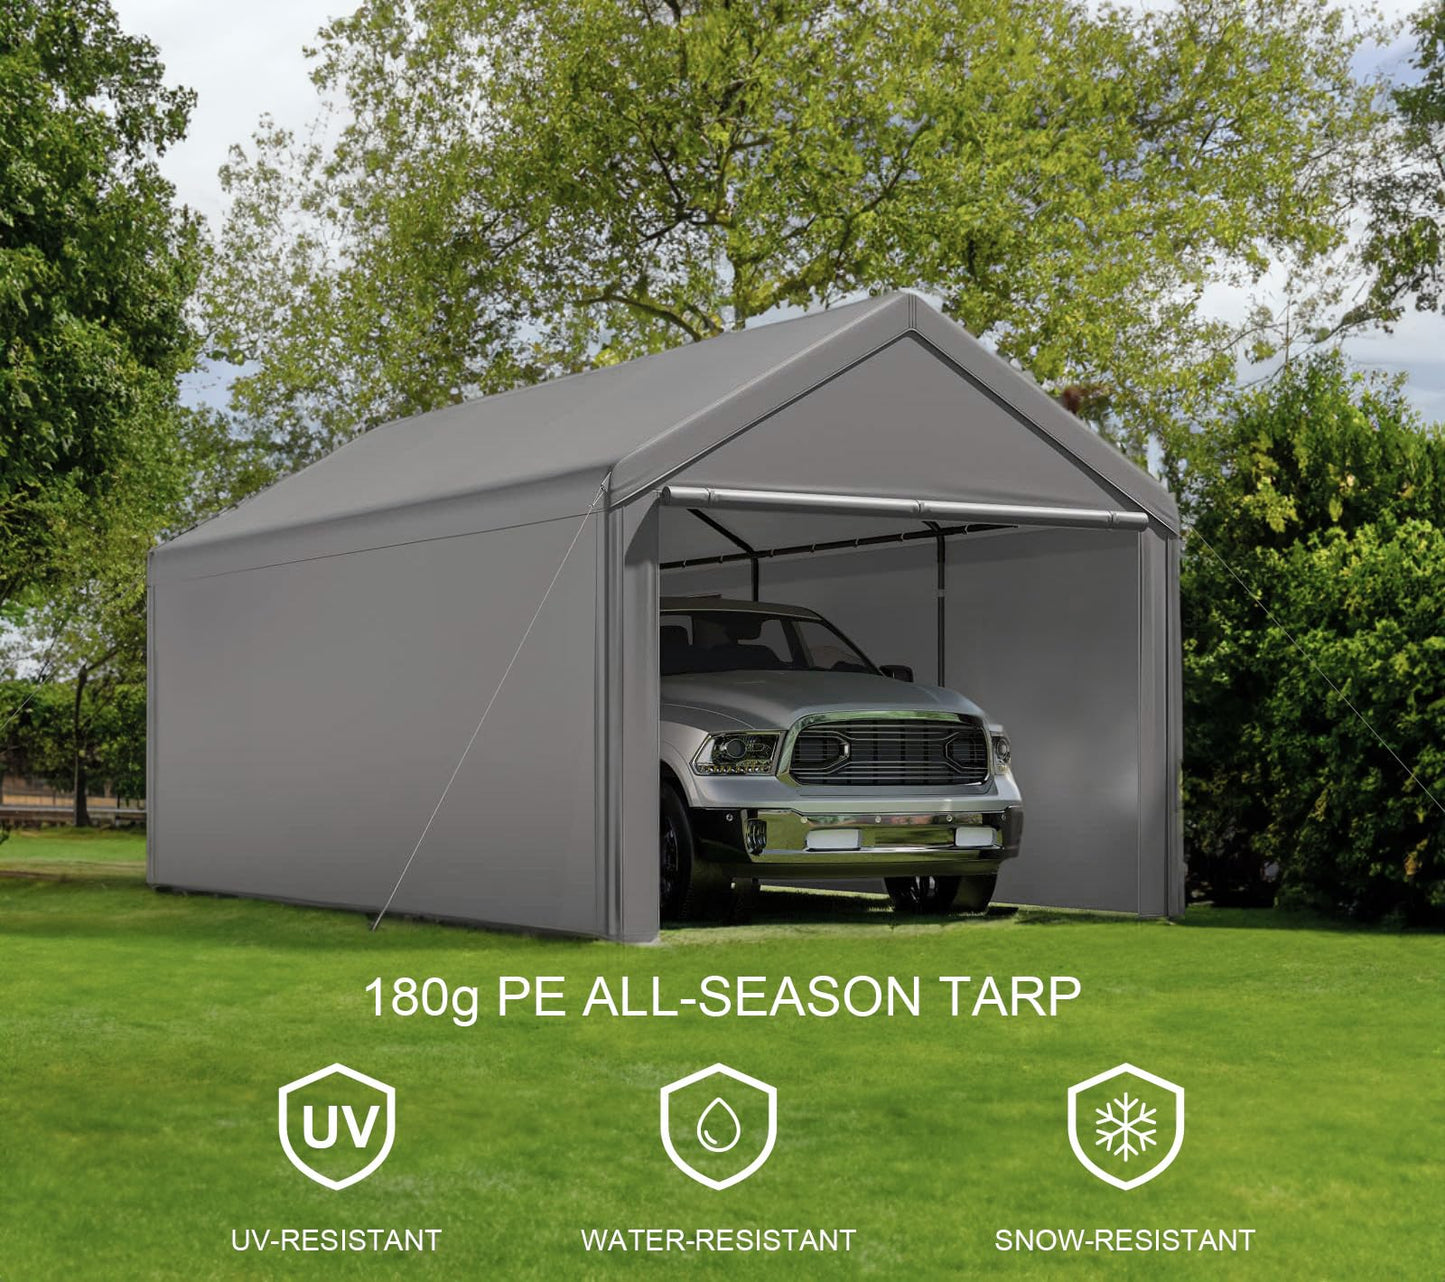 10x20ft Heavy Duty Carport with Removable Sidewalls,All Weather Carport Garage Party Tent Large Outdoor Canopy Storage Shed for Auto,Truck,Boat,Party